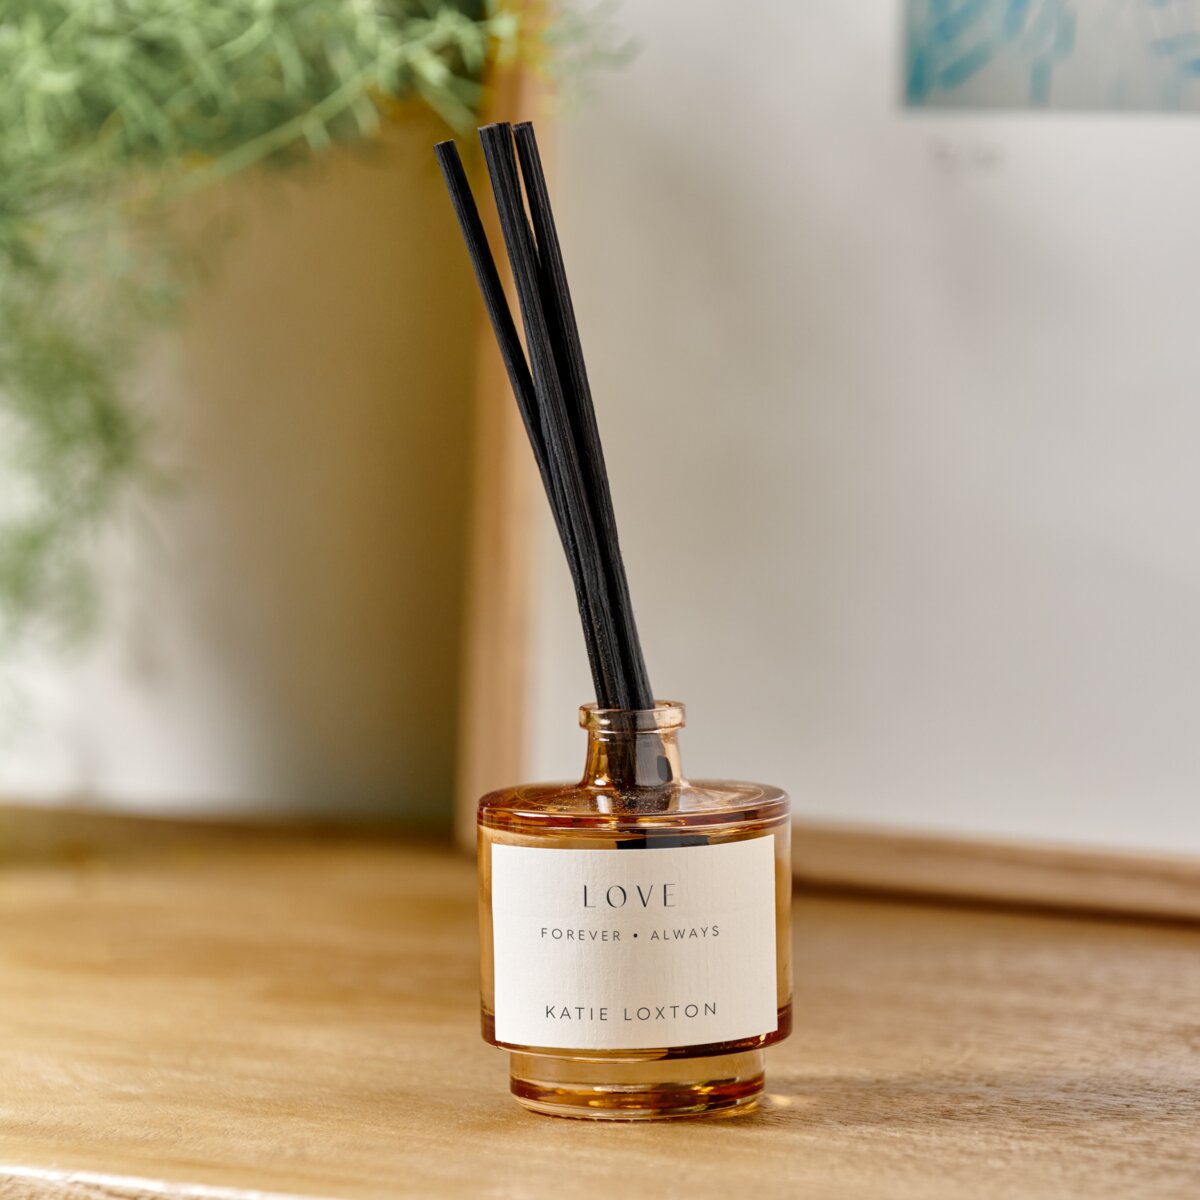 reed diffuser in an amber glass bottle with 'love' and black diffuser reeds